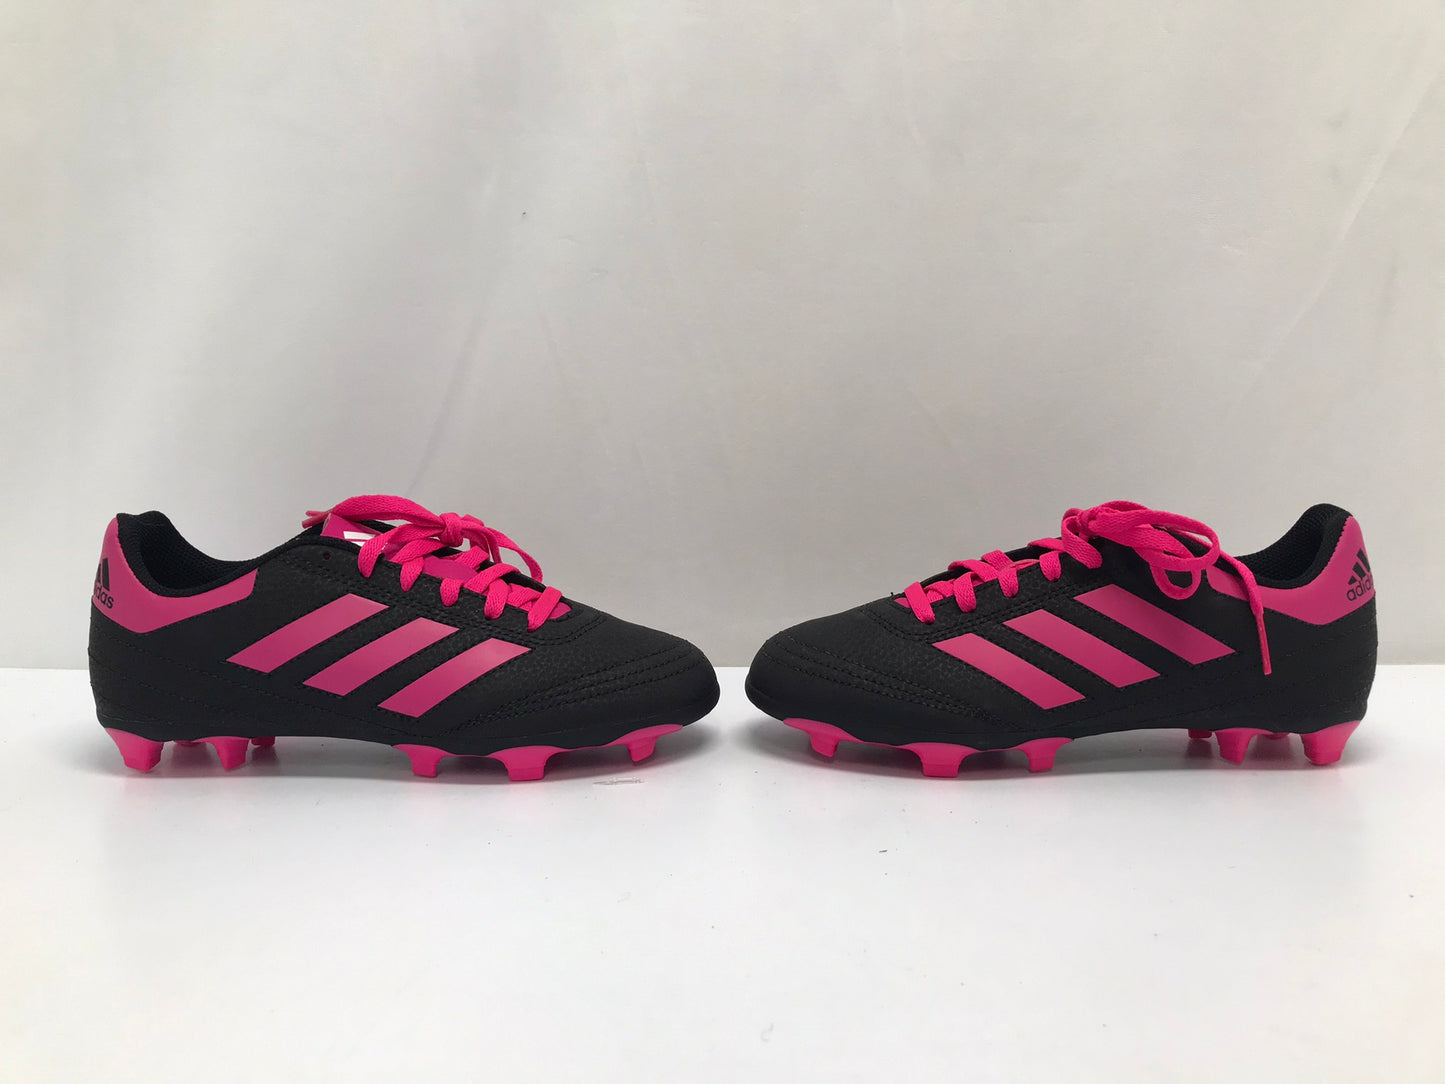 Soccer Shoes Cleats Child Size 2.5 Adidas Fushia Black New With Tags